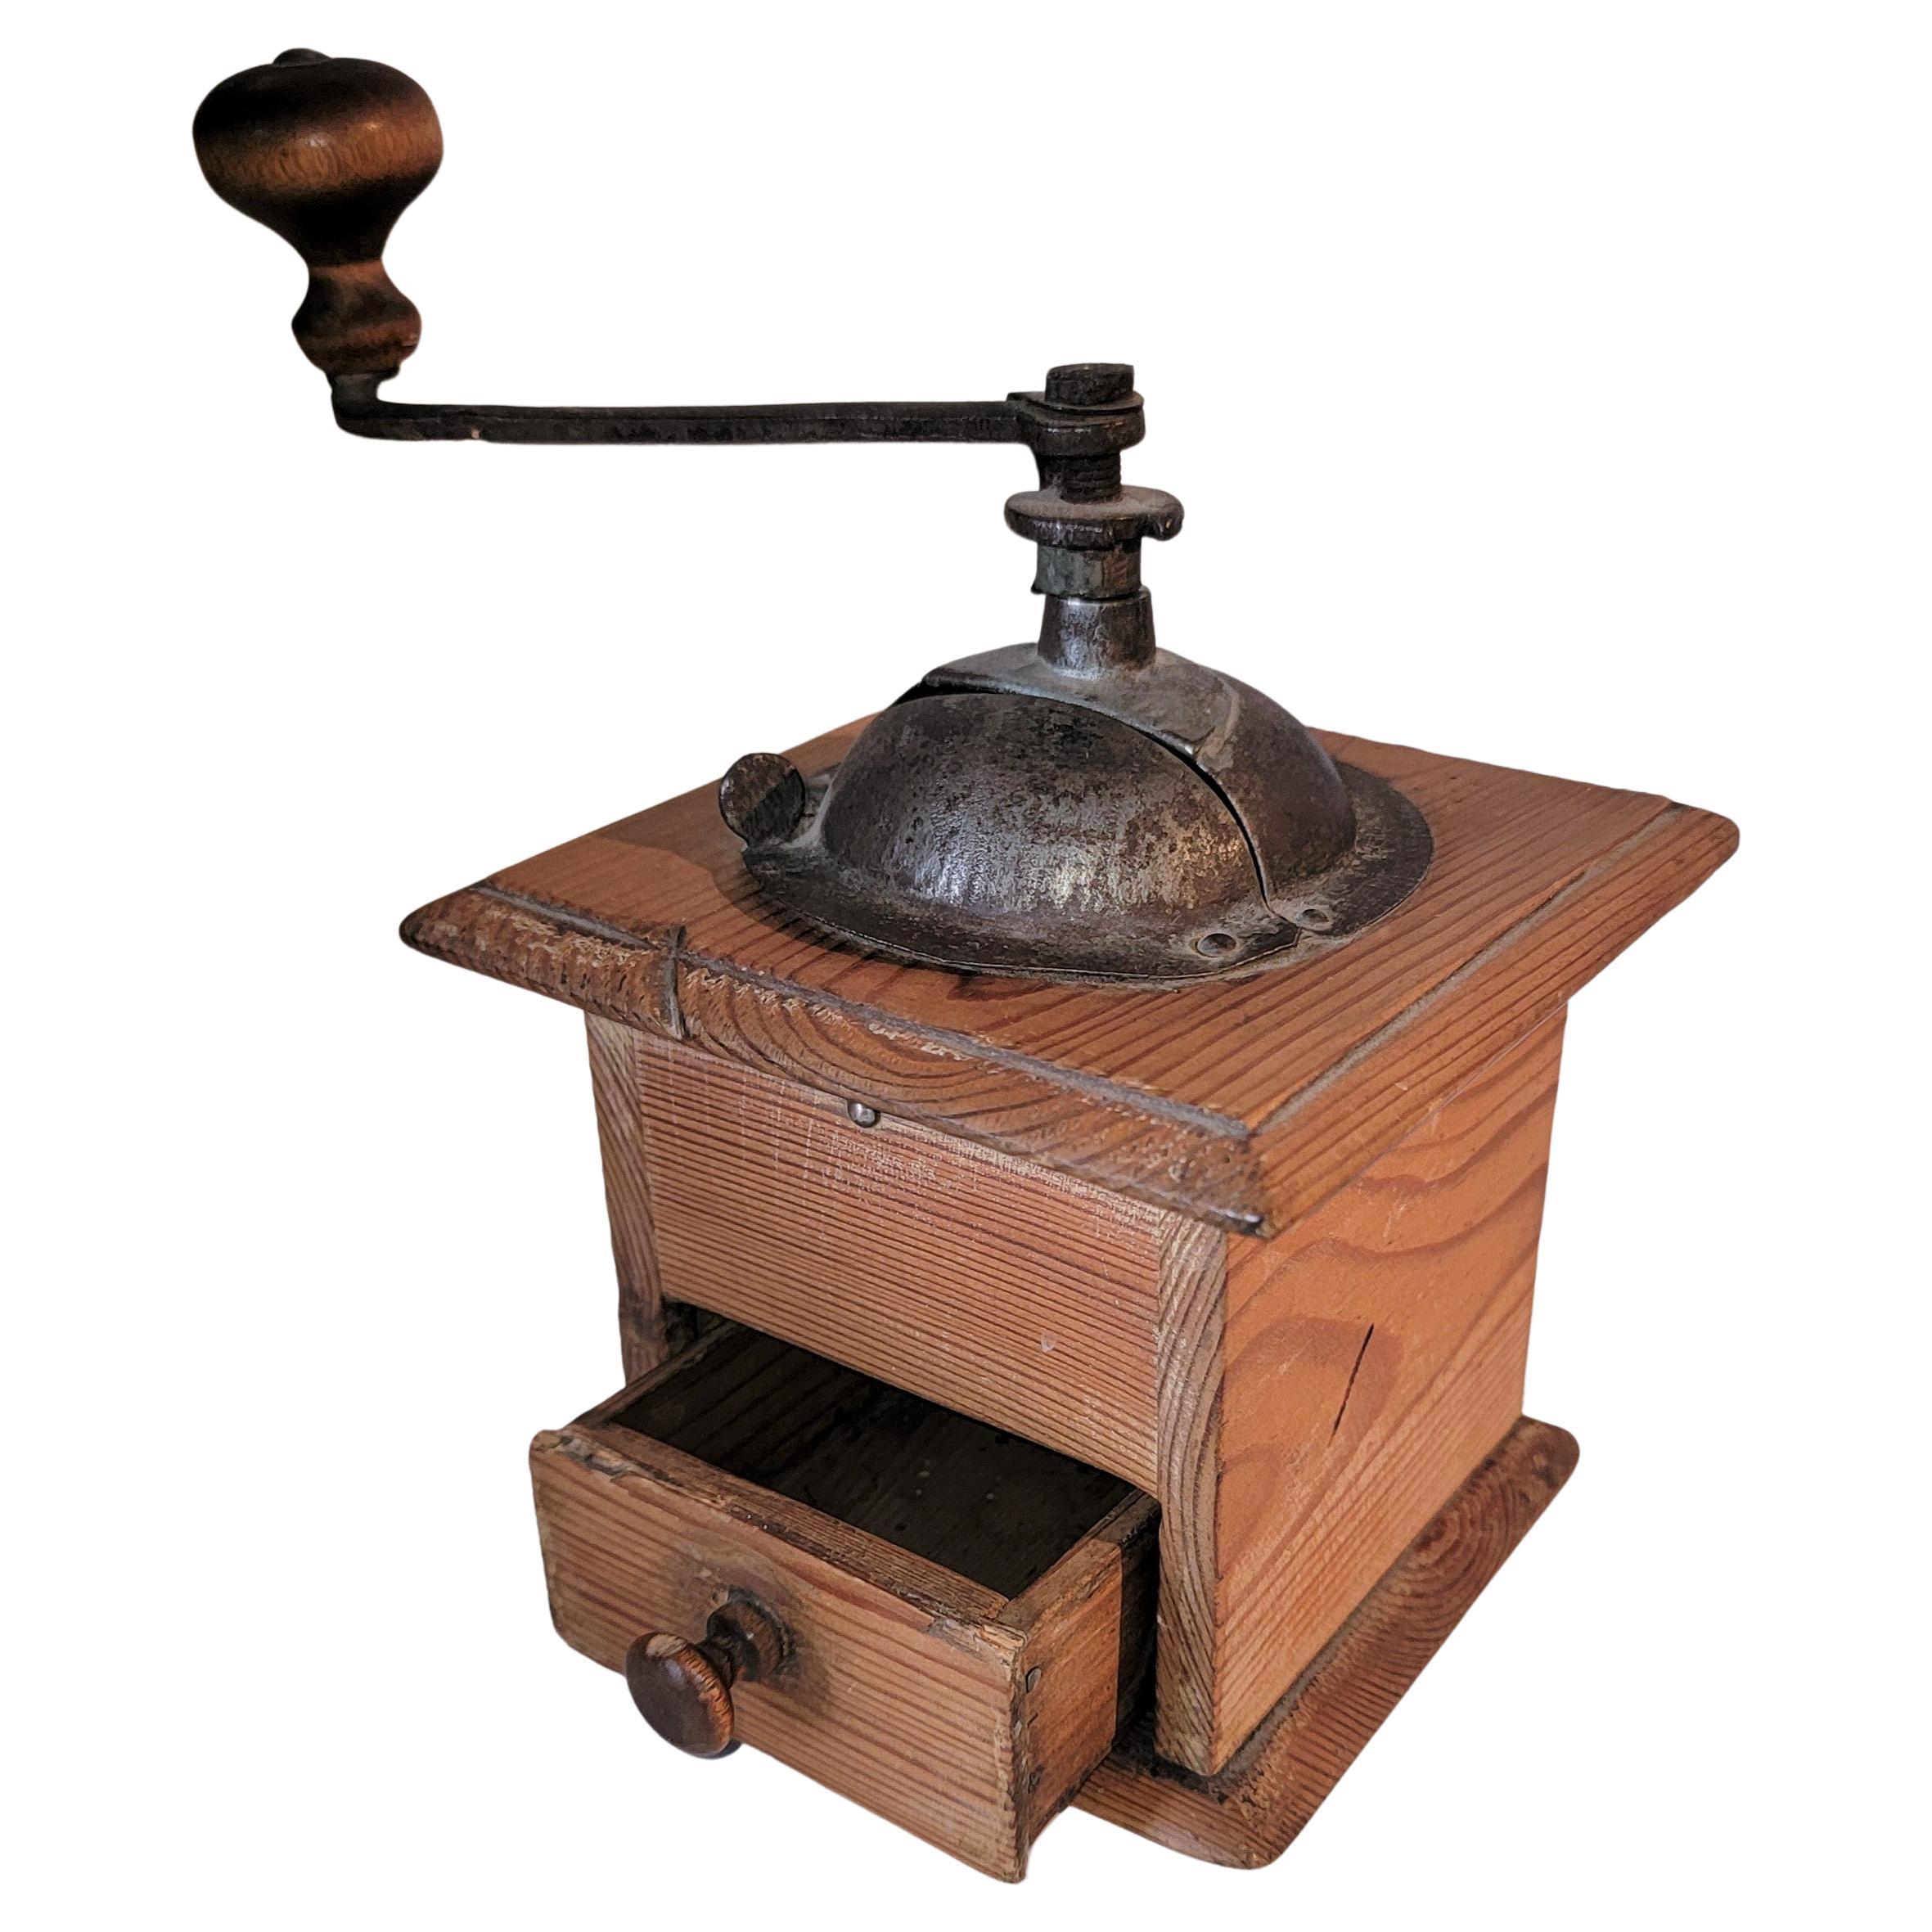 19th C Coffee Grinder. Grinder is in good working condition.